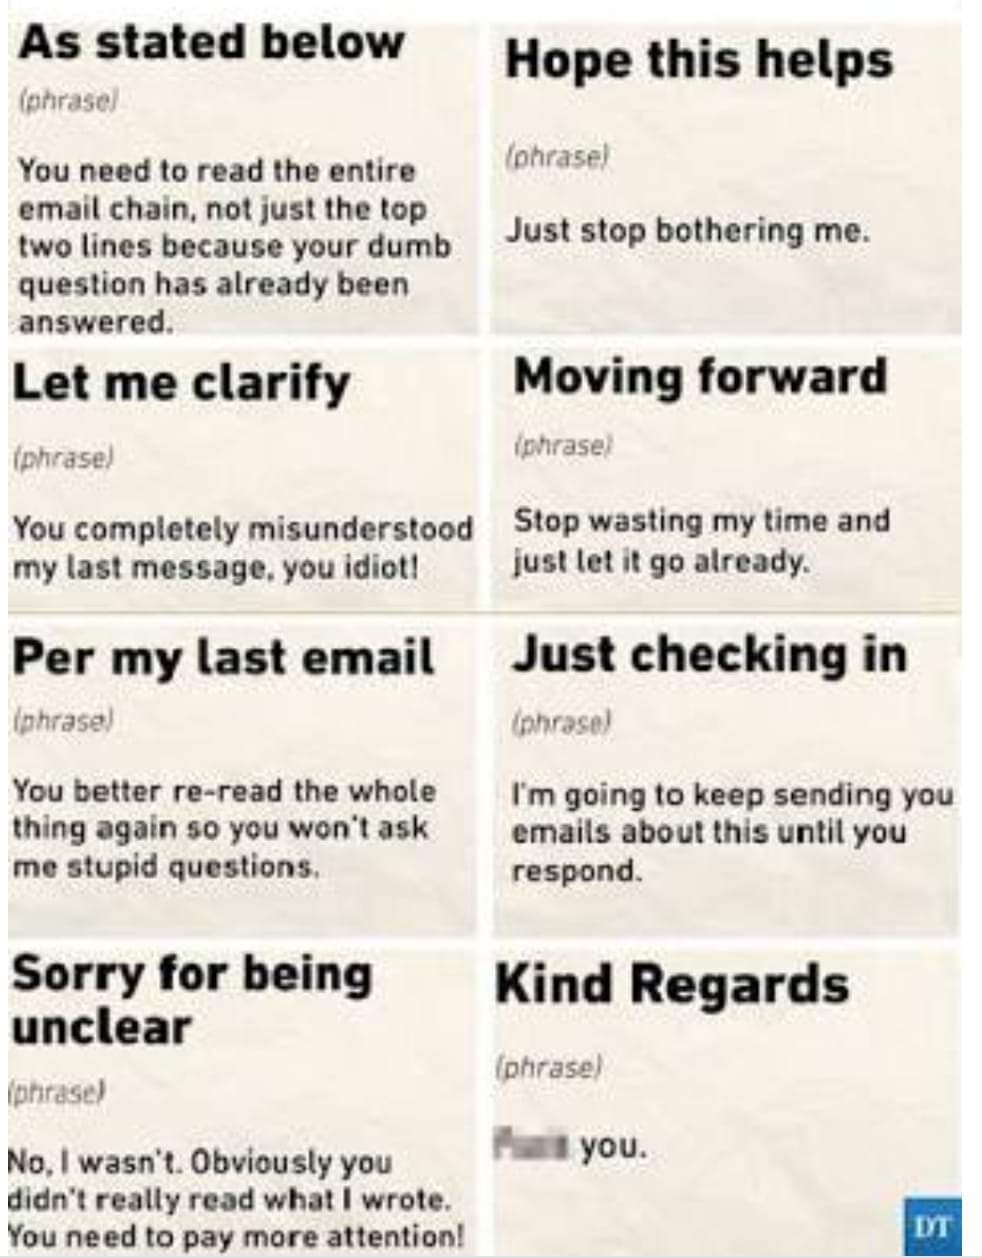 Email phrases and their meaning